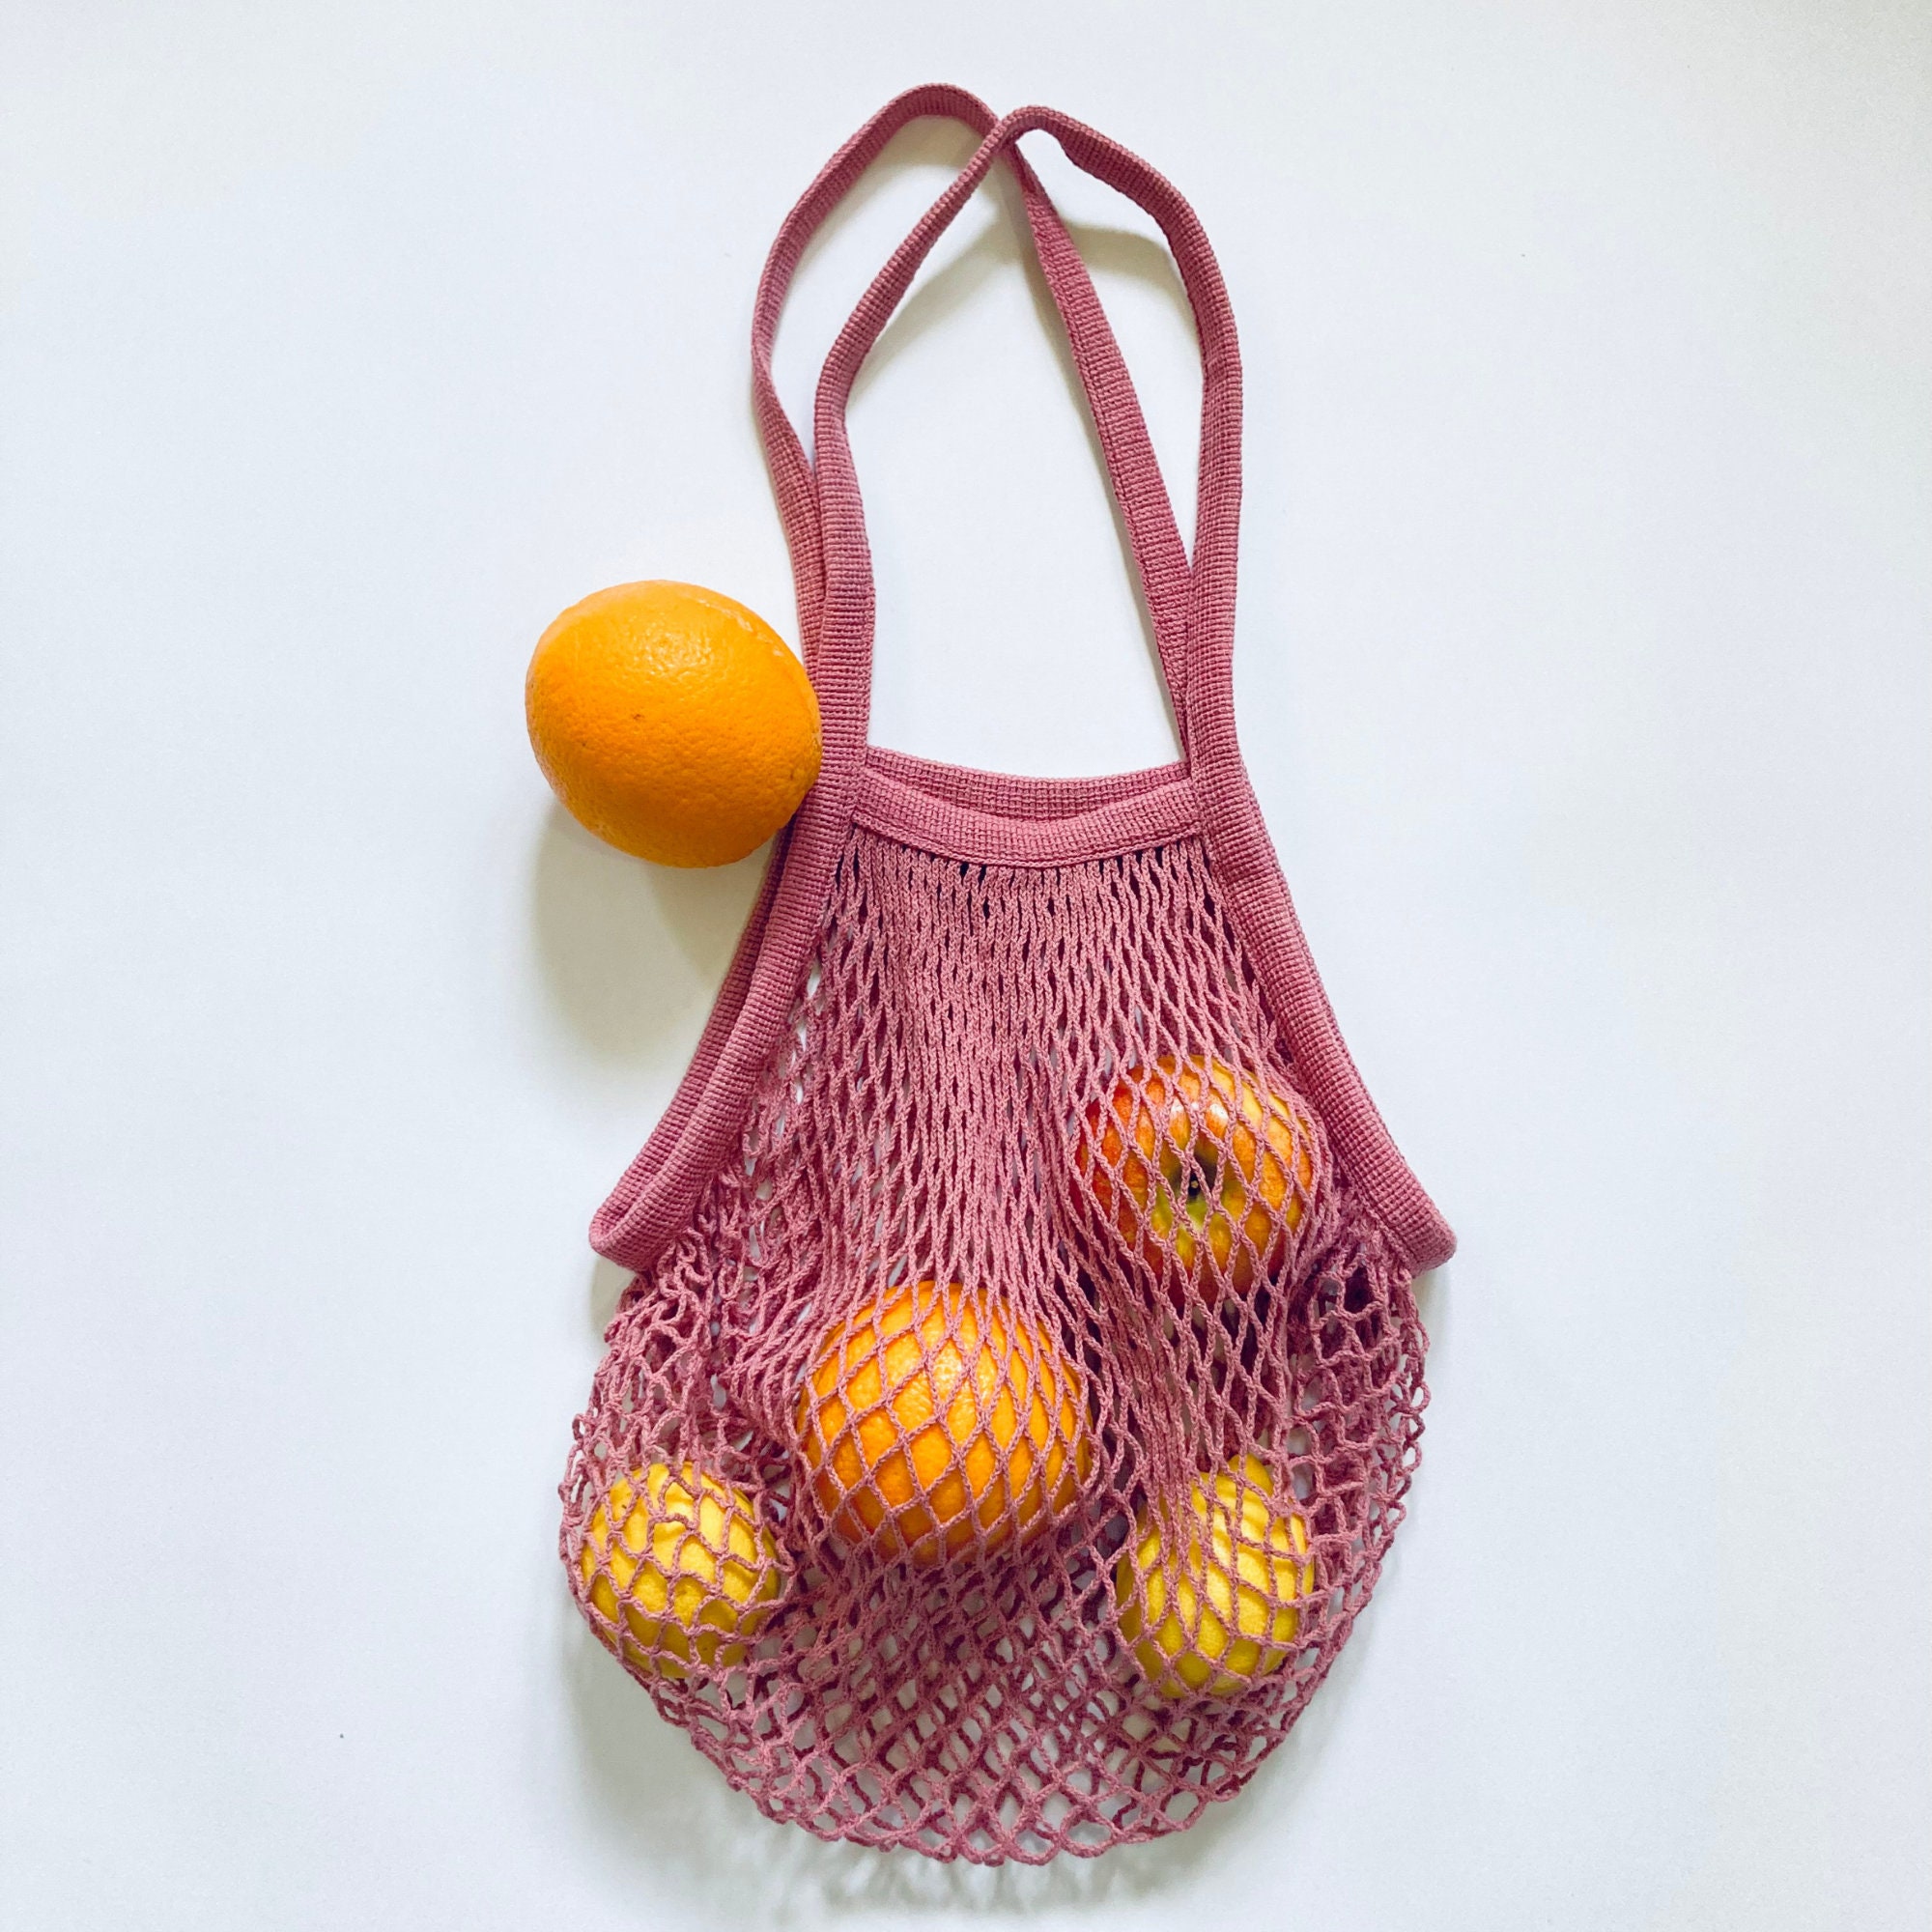 Reusable Grocery Net Bags, Cotton Net Tote, Washable, Foldable, Farmer's  Market Bag for Fruits and Vegetables, String Mesh Shopping Storage Bag with